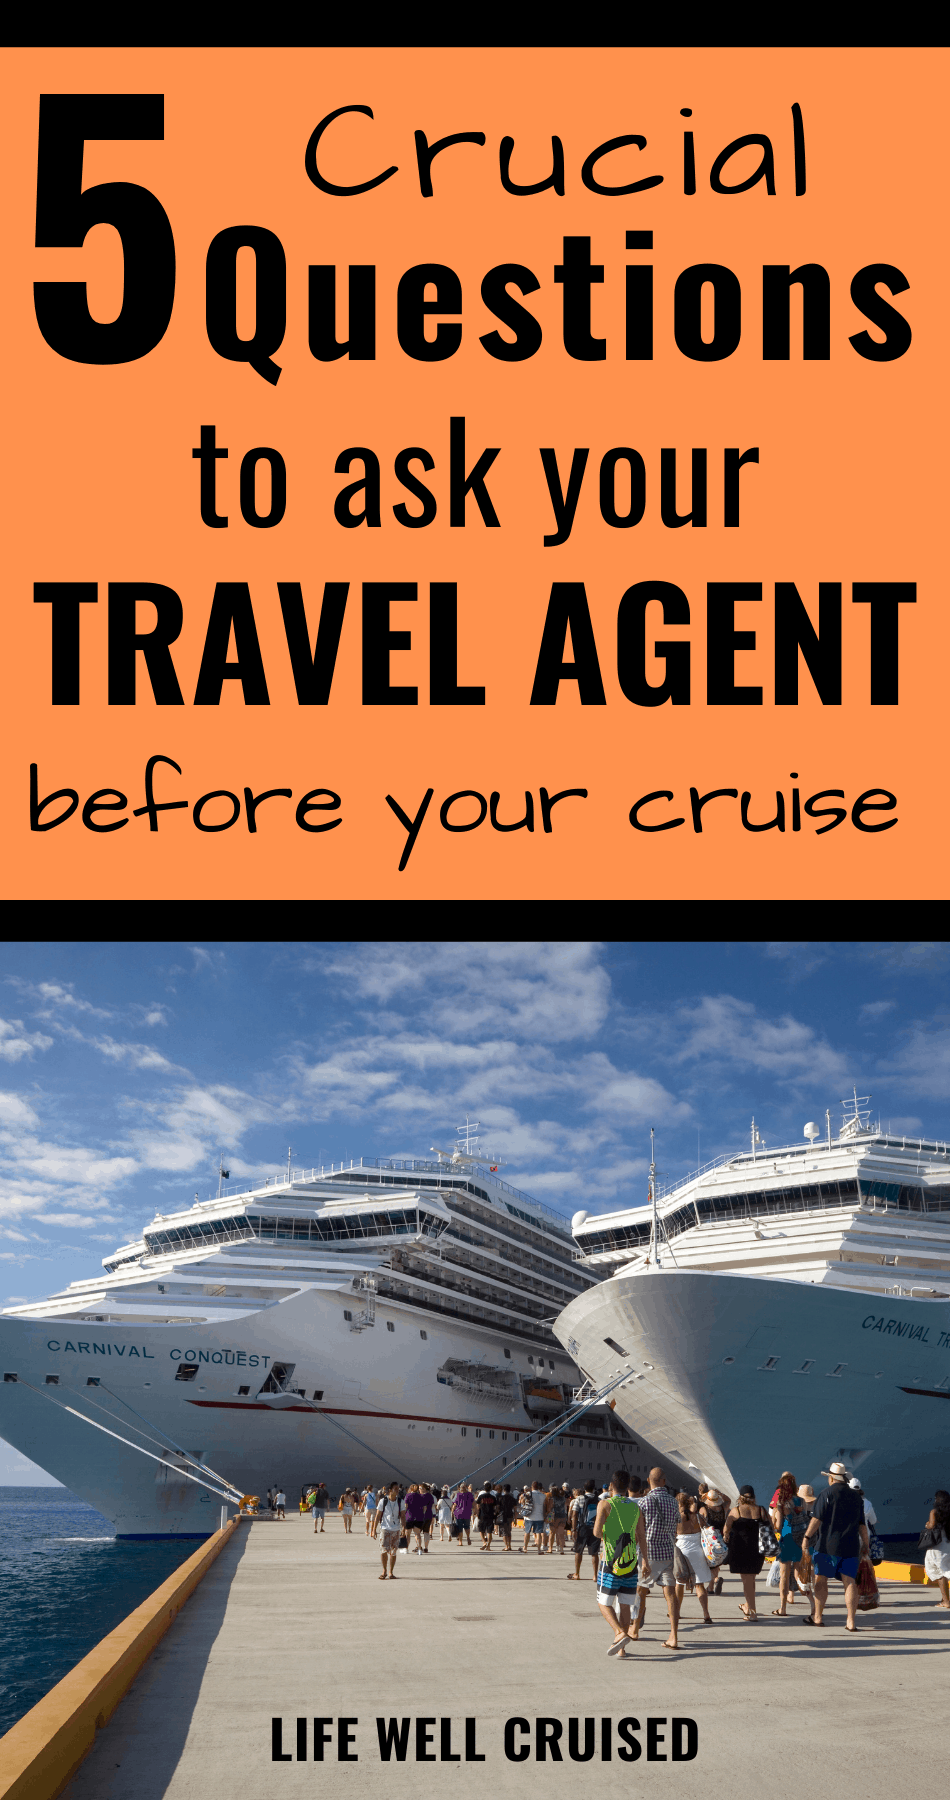 book cruise direct or travel agent